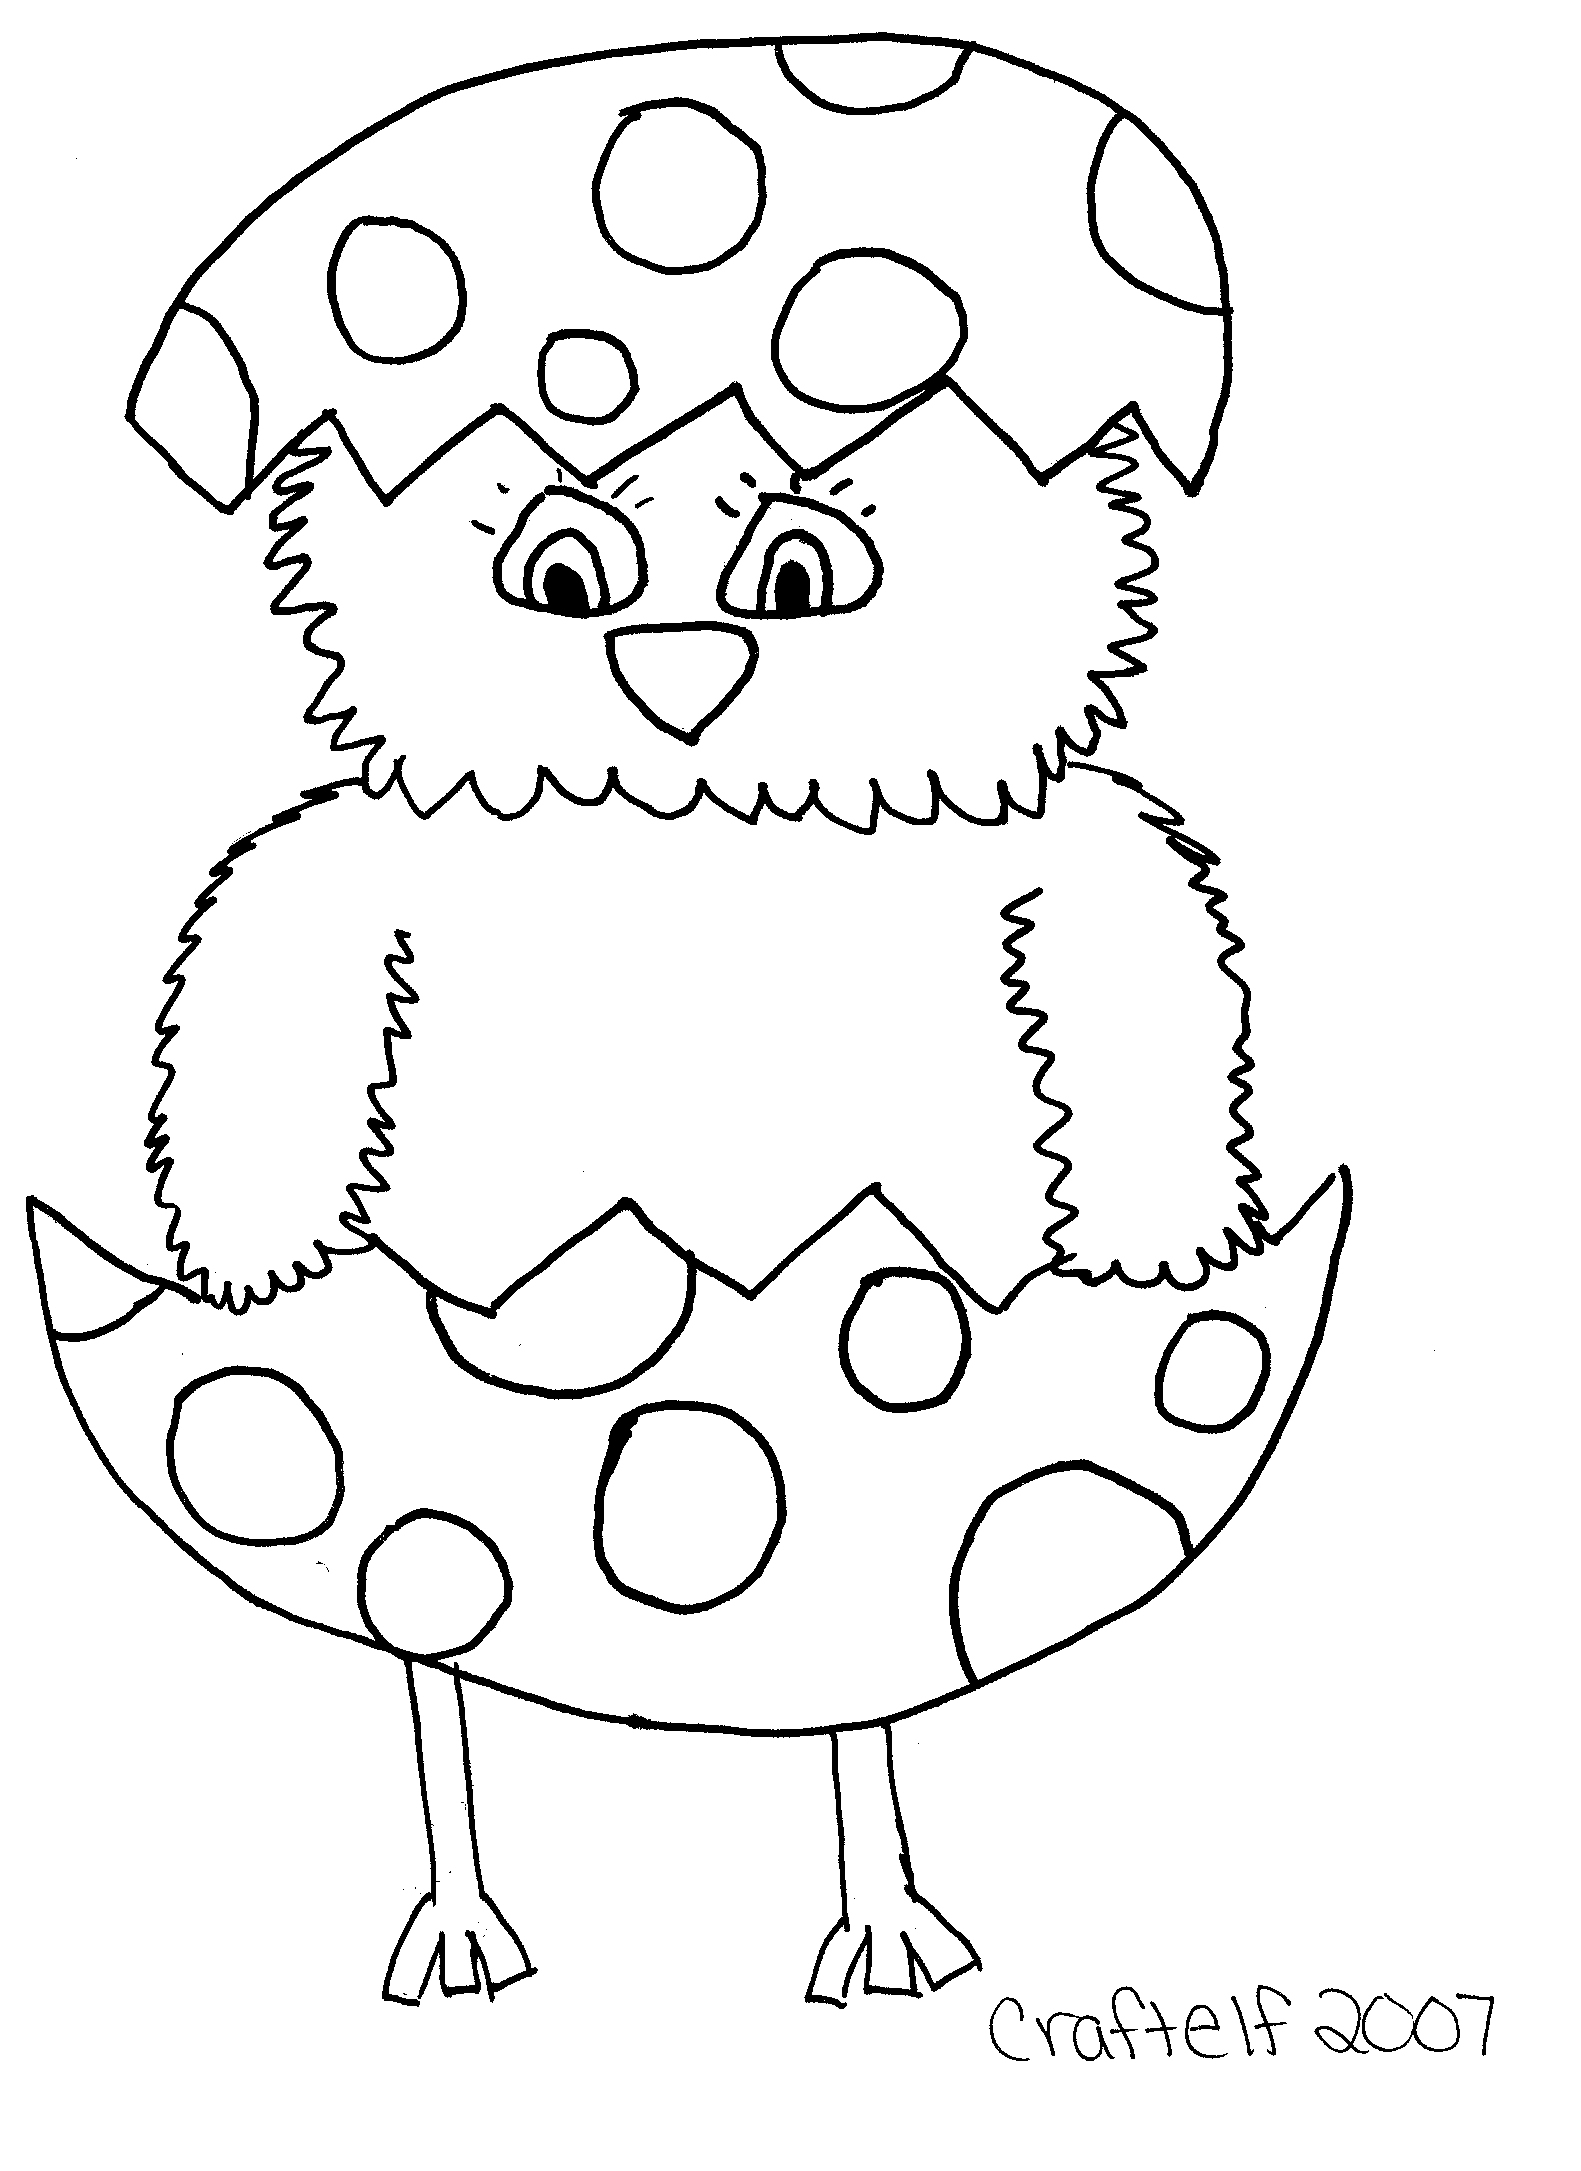 Coloring Pages : Religeous Easter Coloring Pages Printable Free For - Easter Color Pages Free Printable